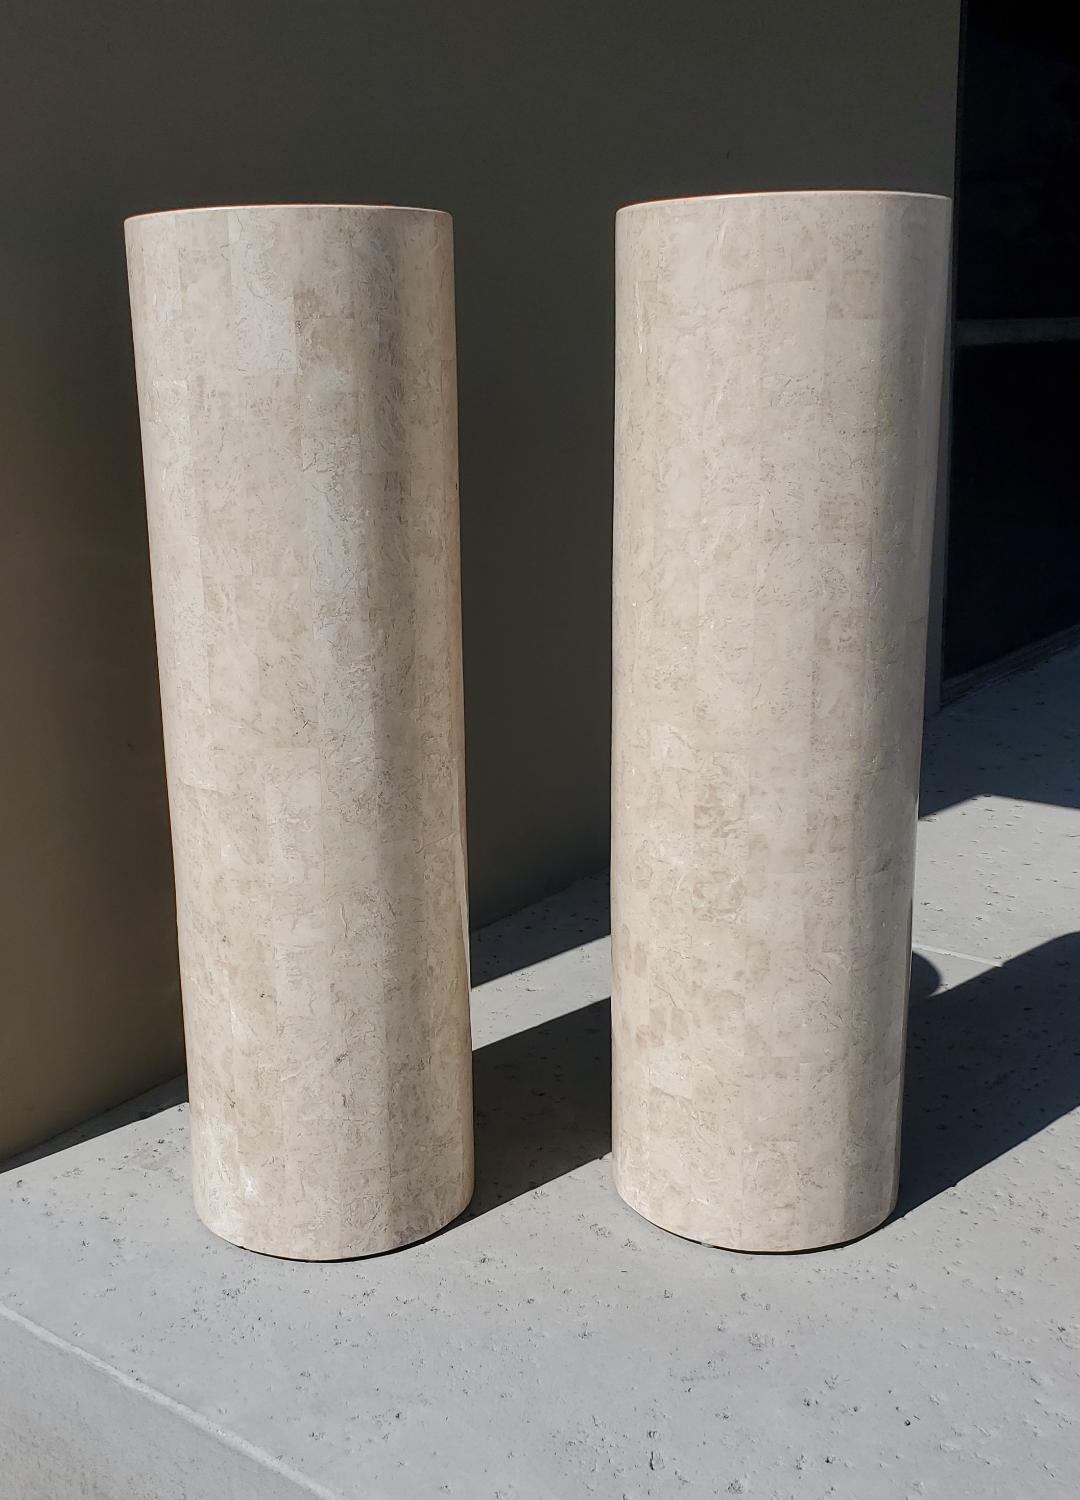 Marquis Collection of Beverly Hills, 1980s Round Tessellated Stone Pedestals 2 2